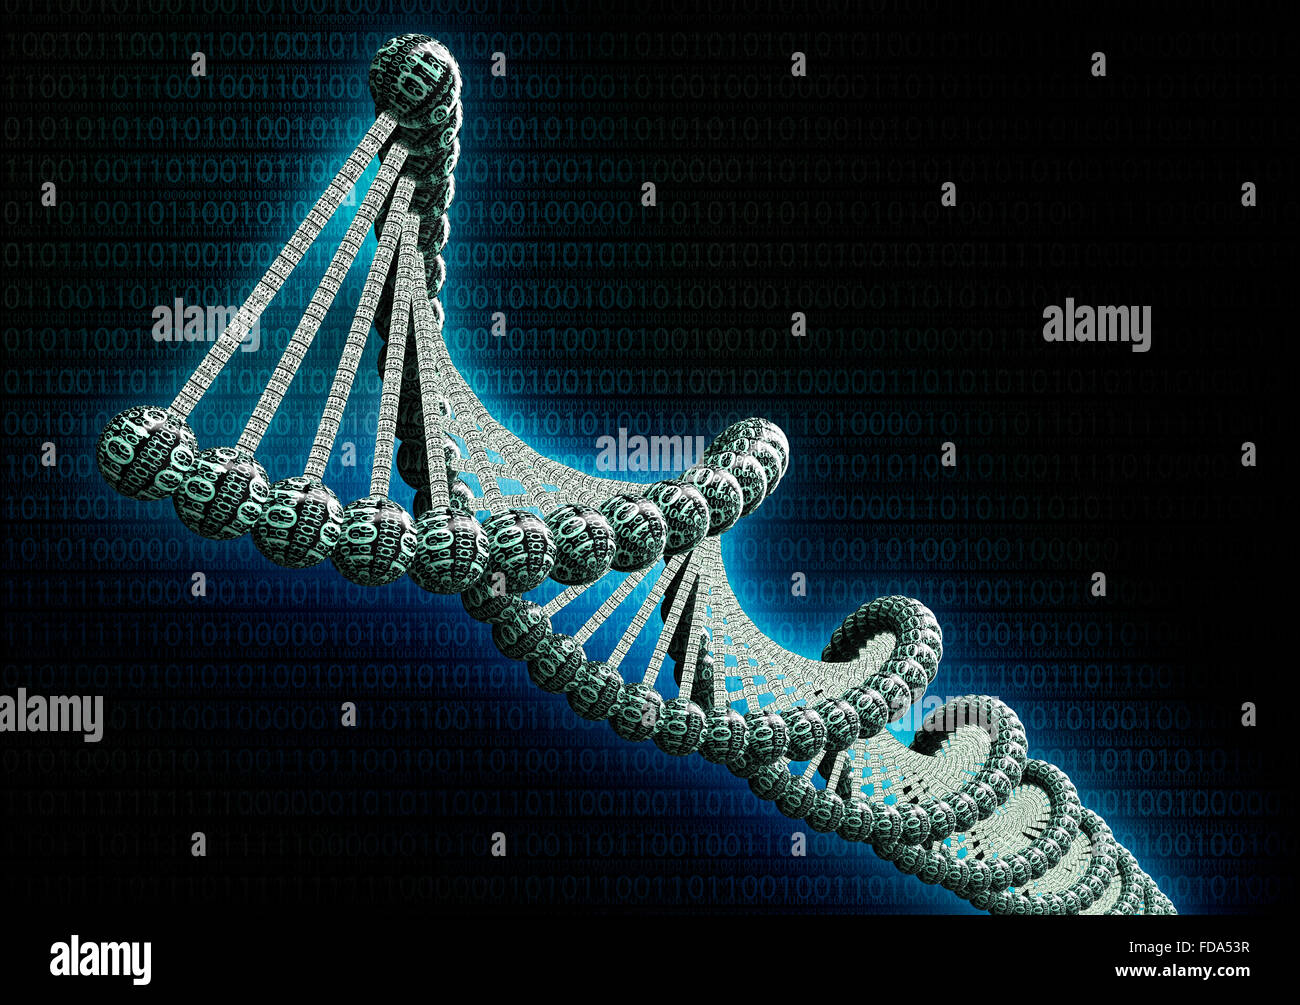 dubble helix dna made out of binary computer code Stock Photo